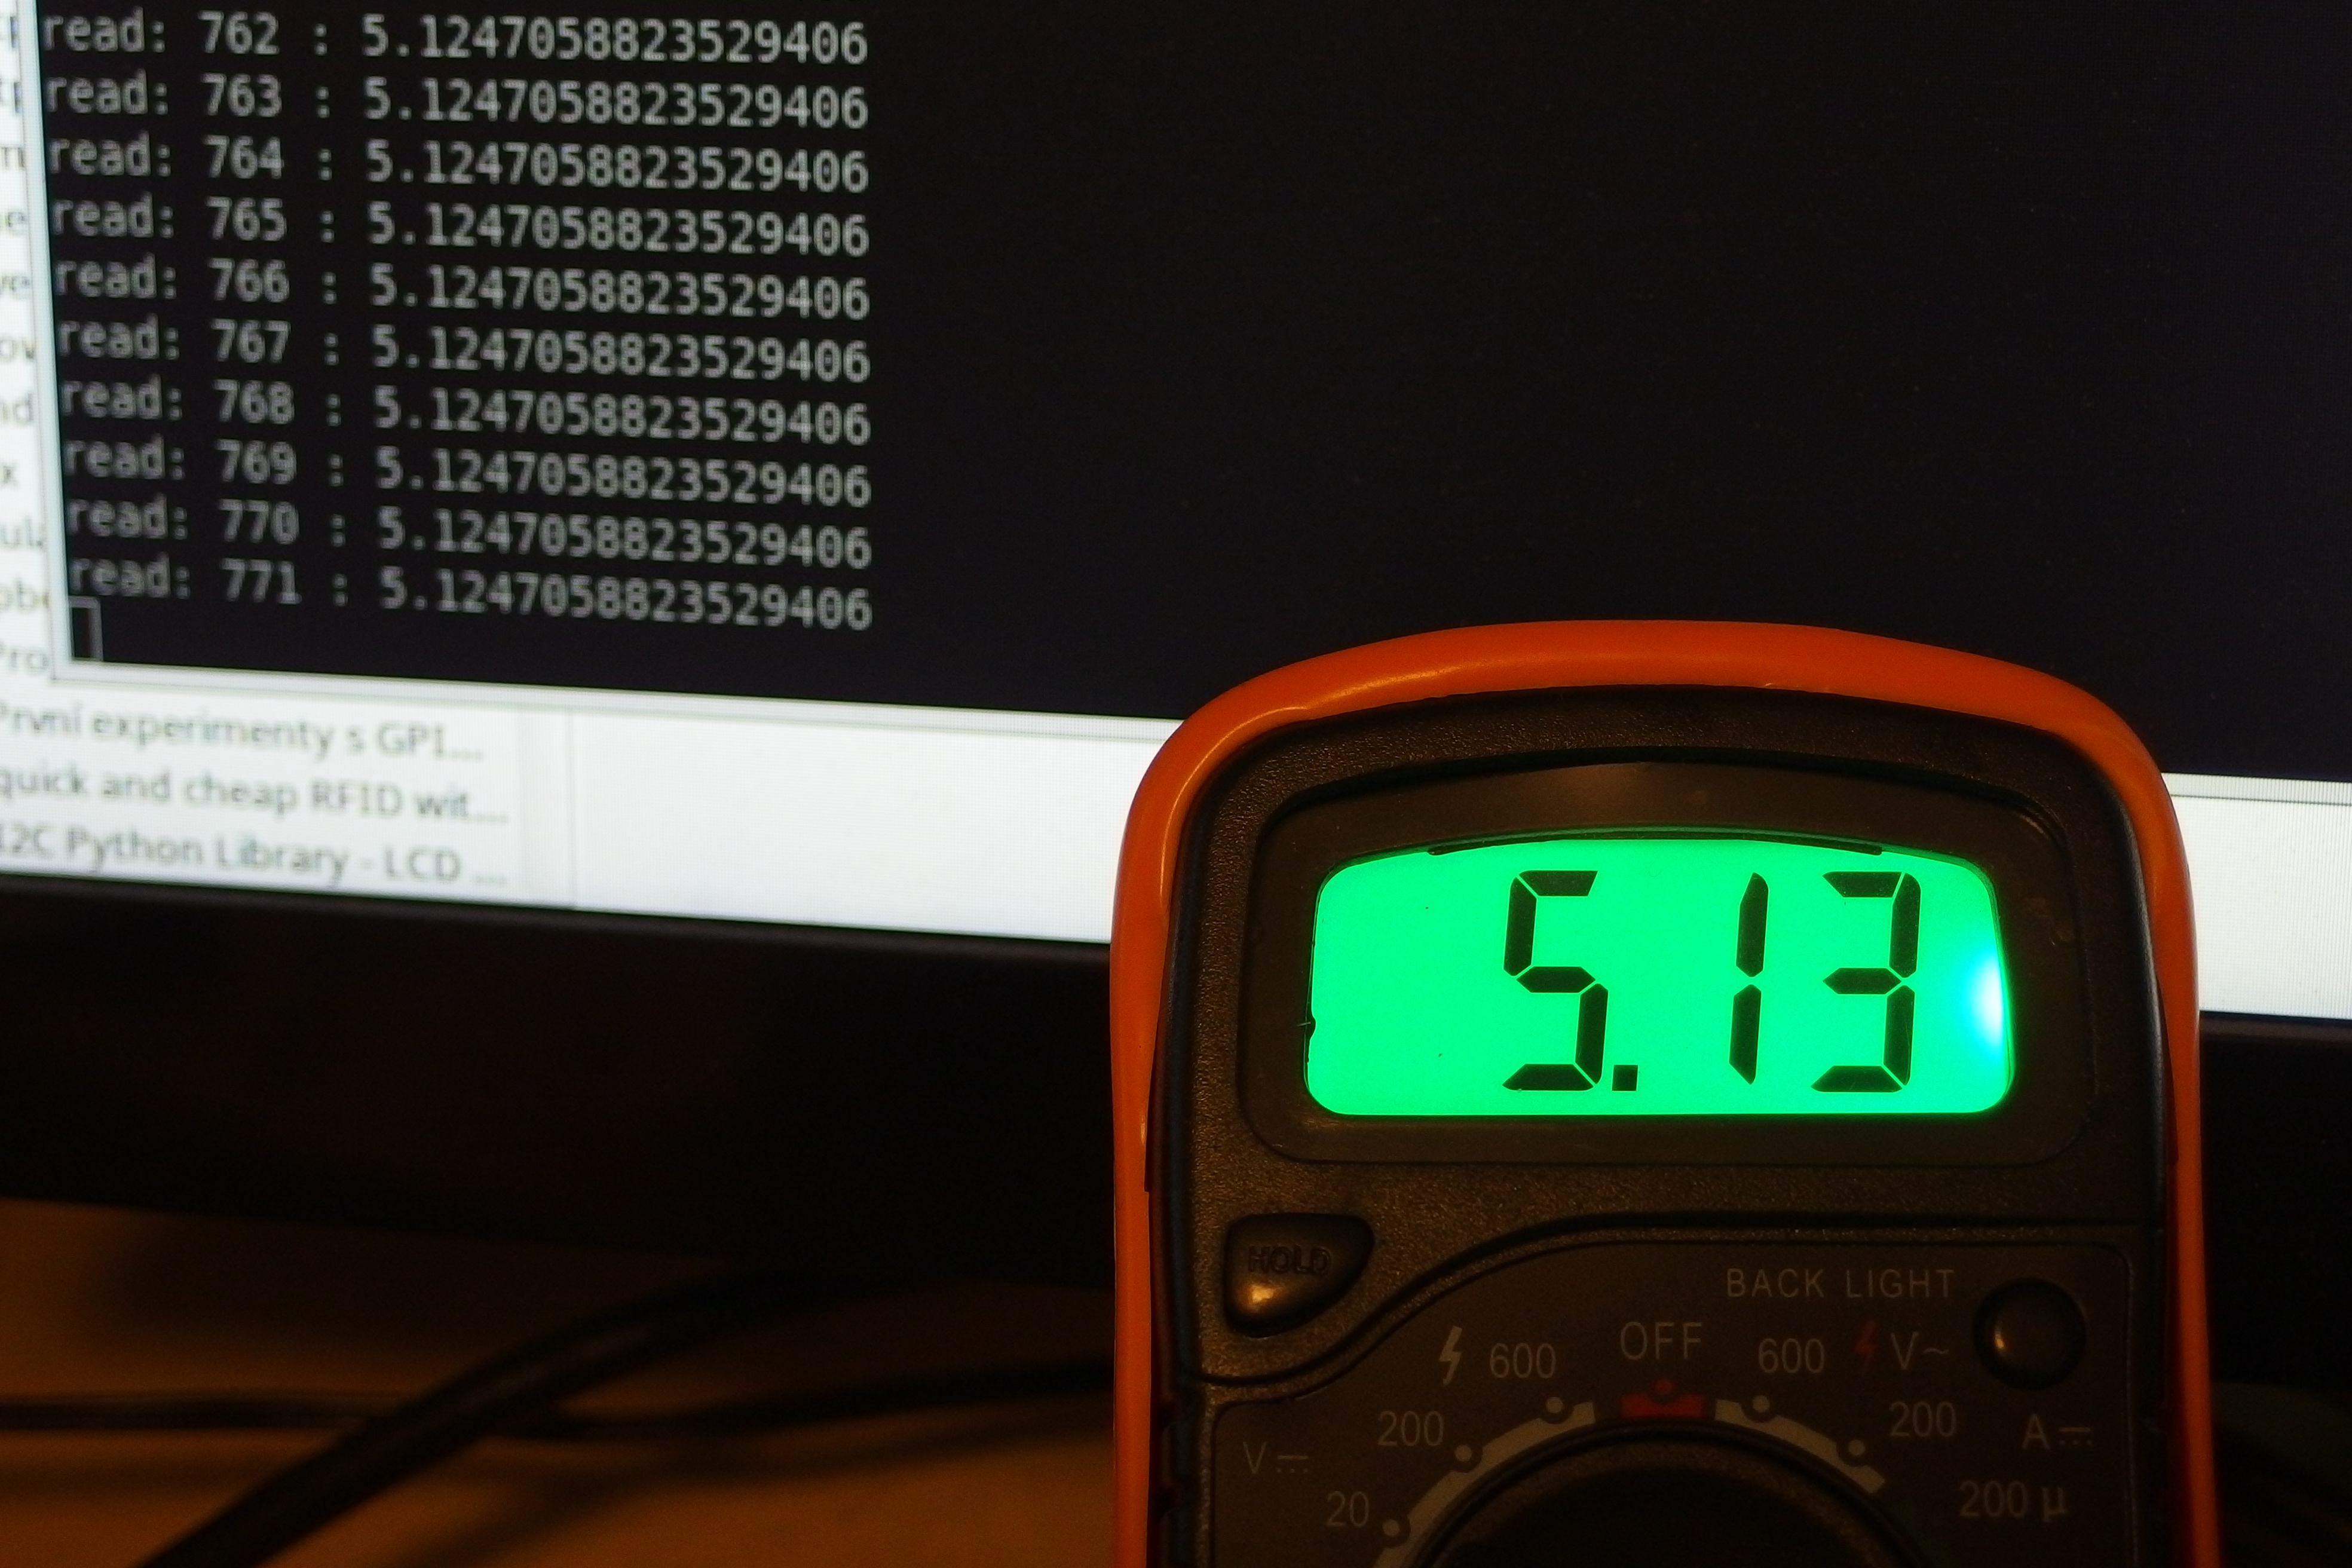 Calibrating ADC with voltage divider using voltmeter